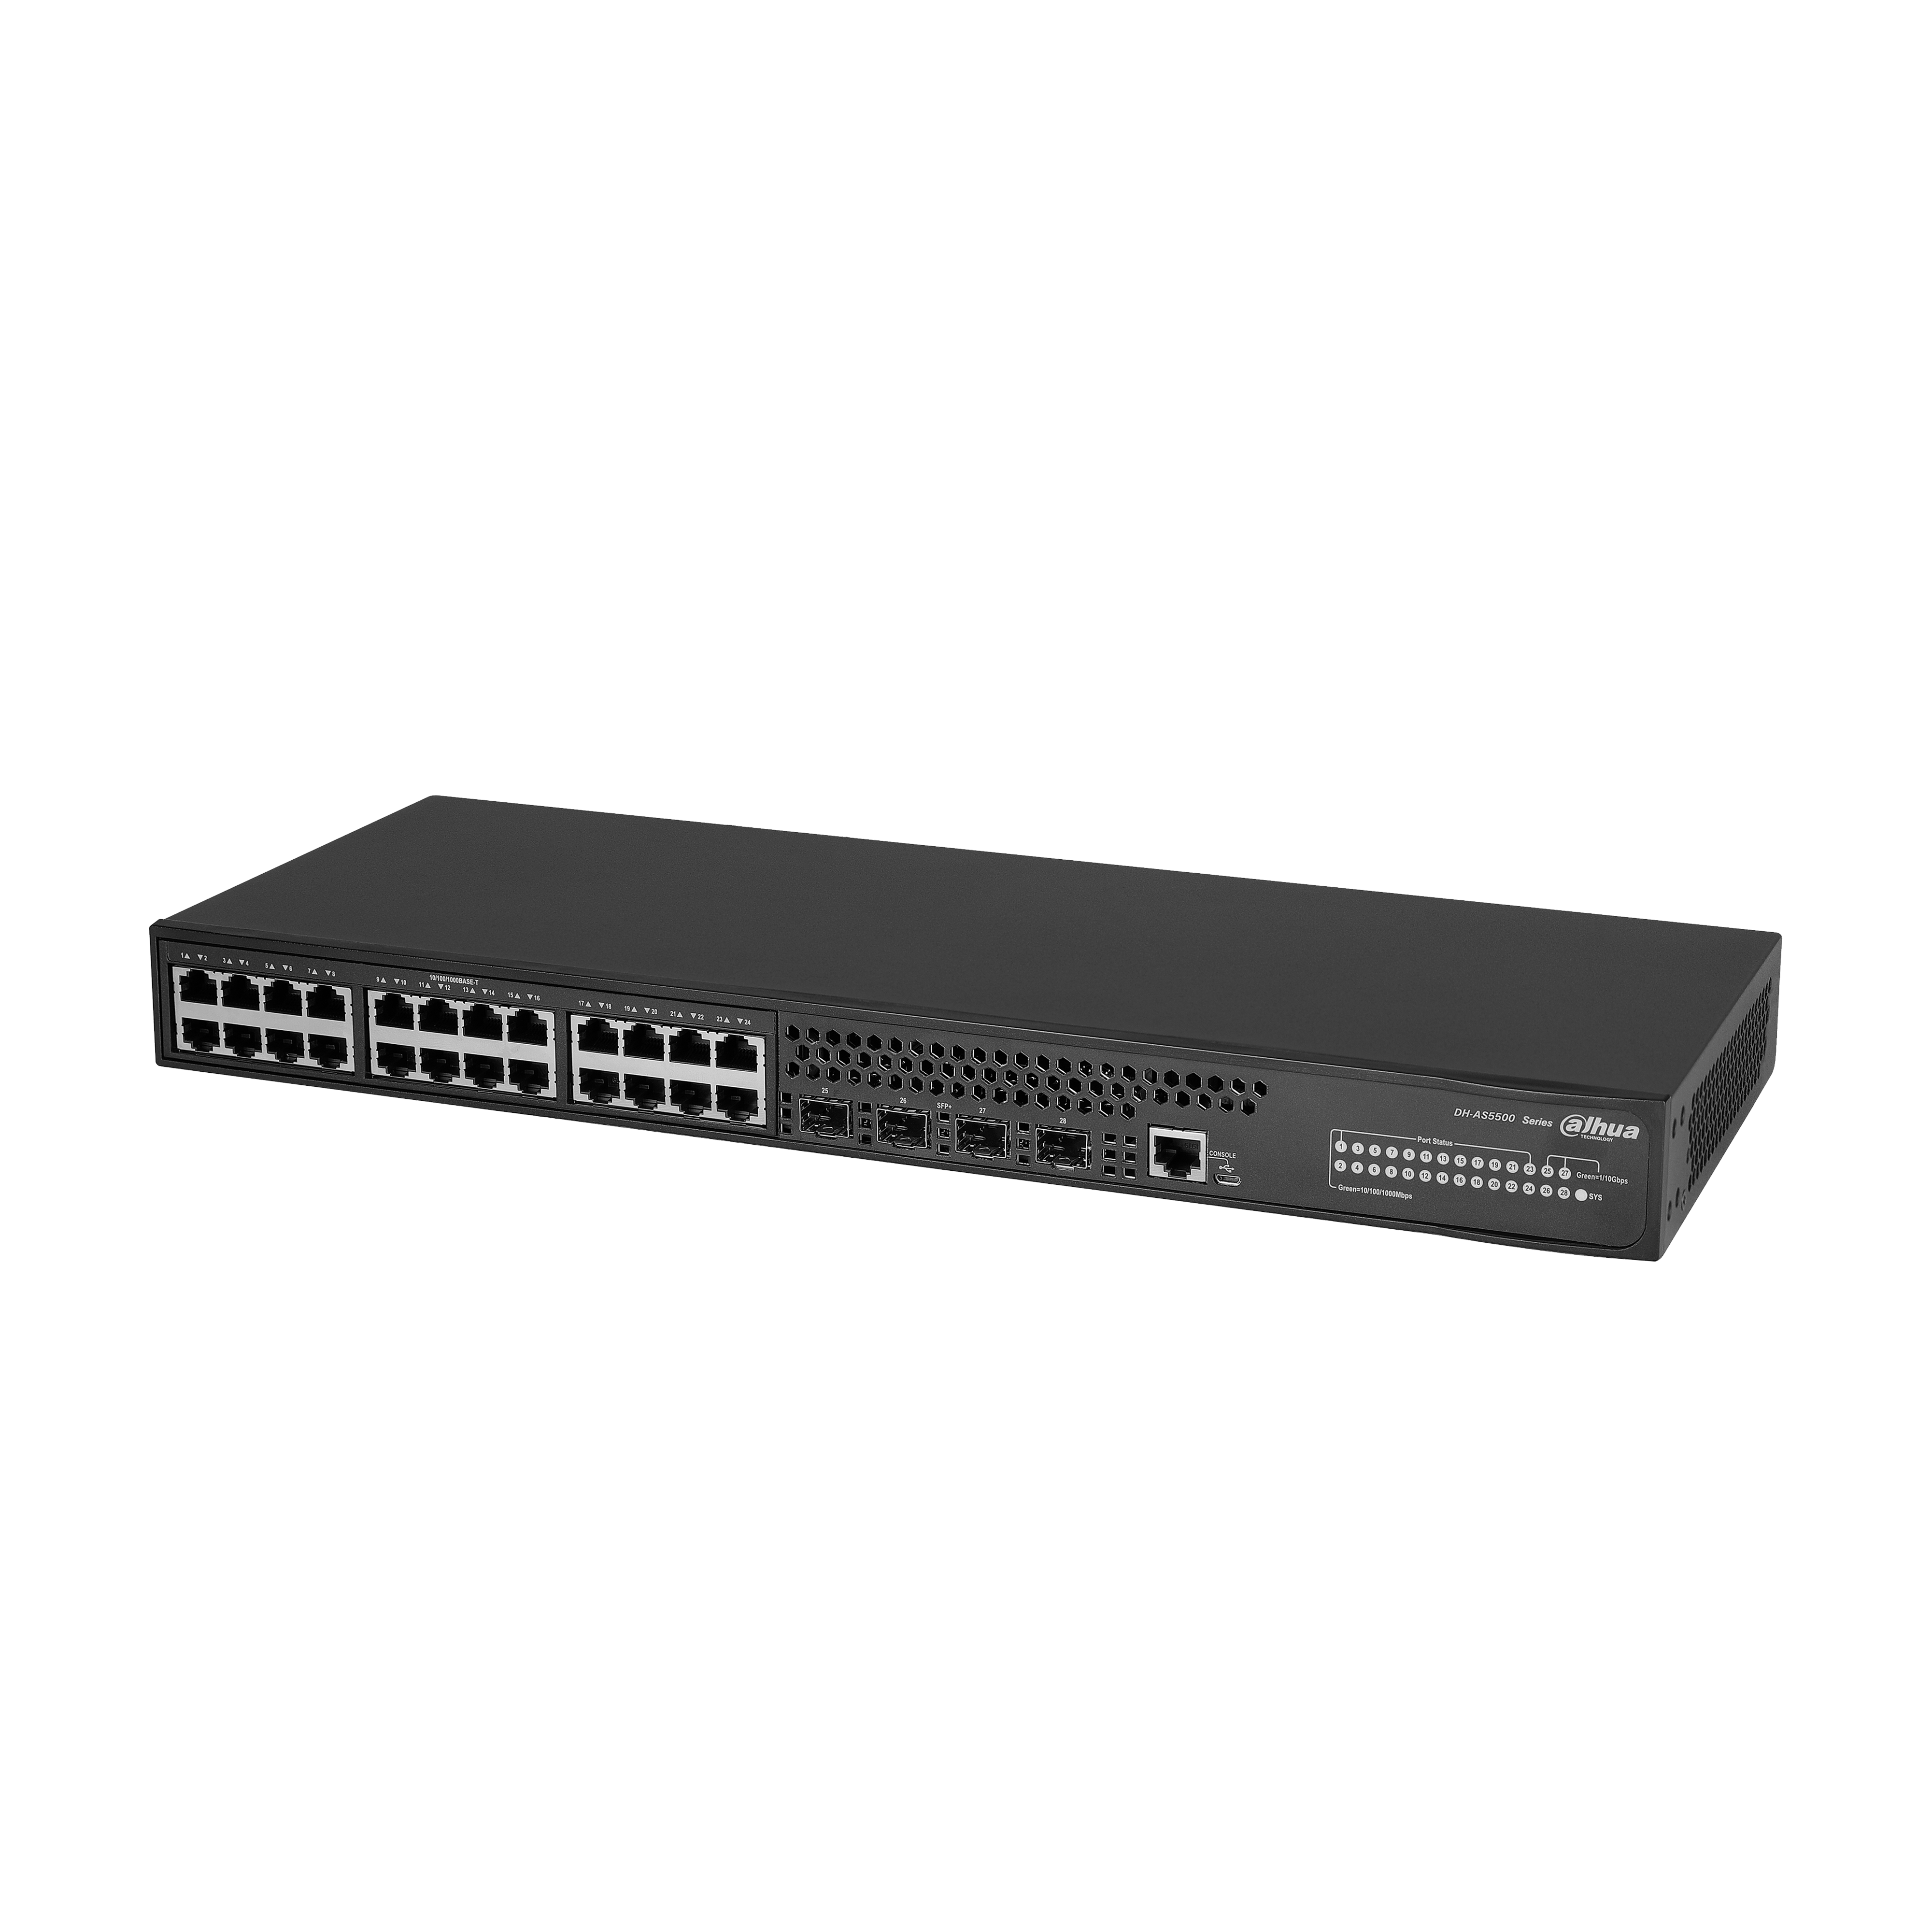 DAHUA AS5500-24GT4XF 28-Port Managed Gigabit Switch with 24-Port RJ45 and 4-Port 10G SFP+